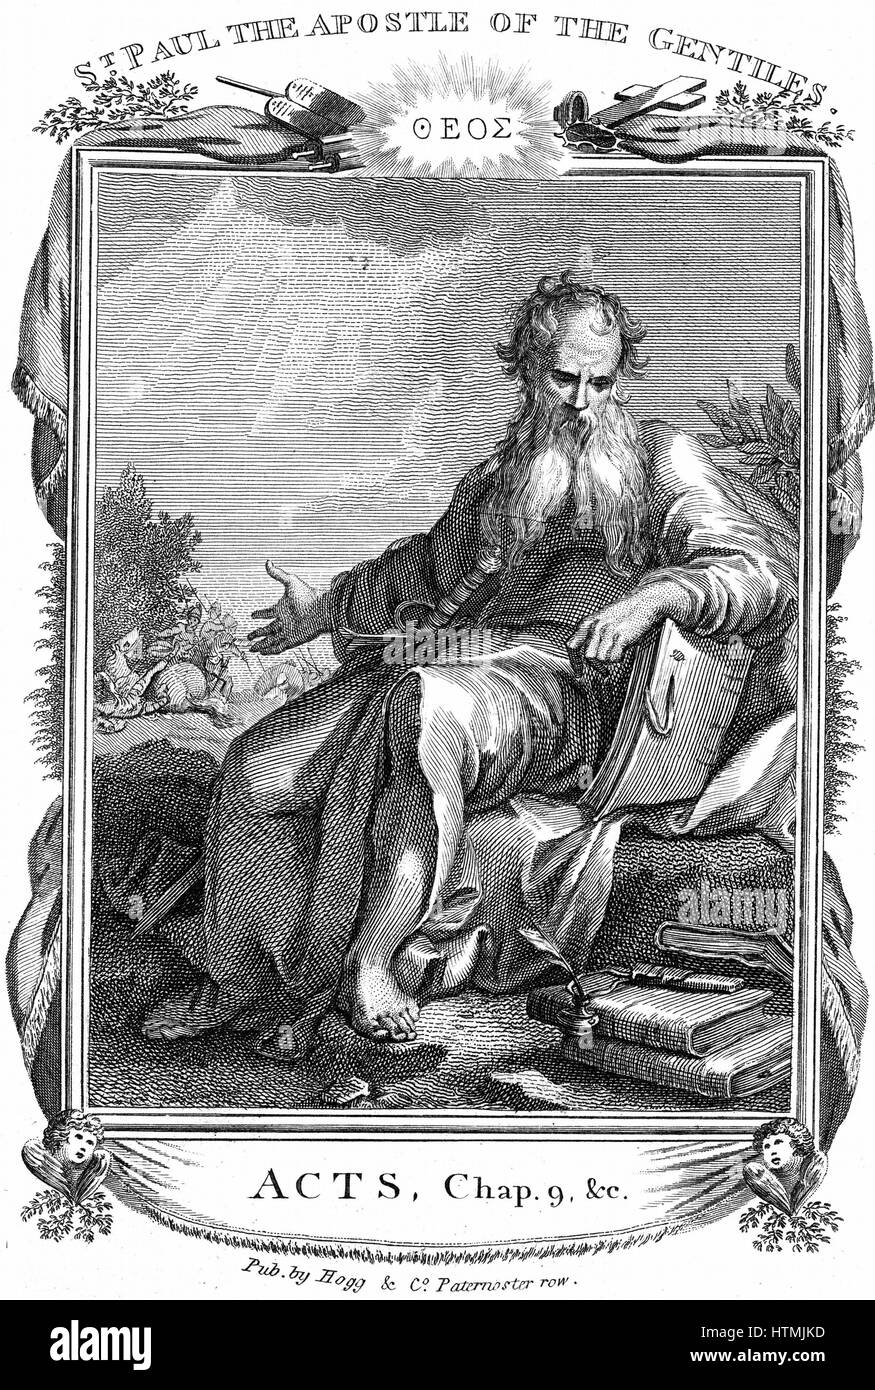 St Paul the Apostle who took Christian message to the Gentiles. In background is his conversion on road to Damascus. At his feet are books and writing materials representing his Epistles. Copperplate engraving early 19th century Stock Photo